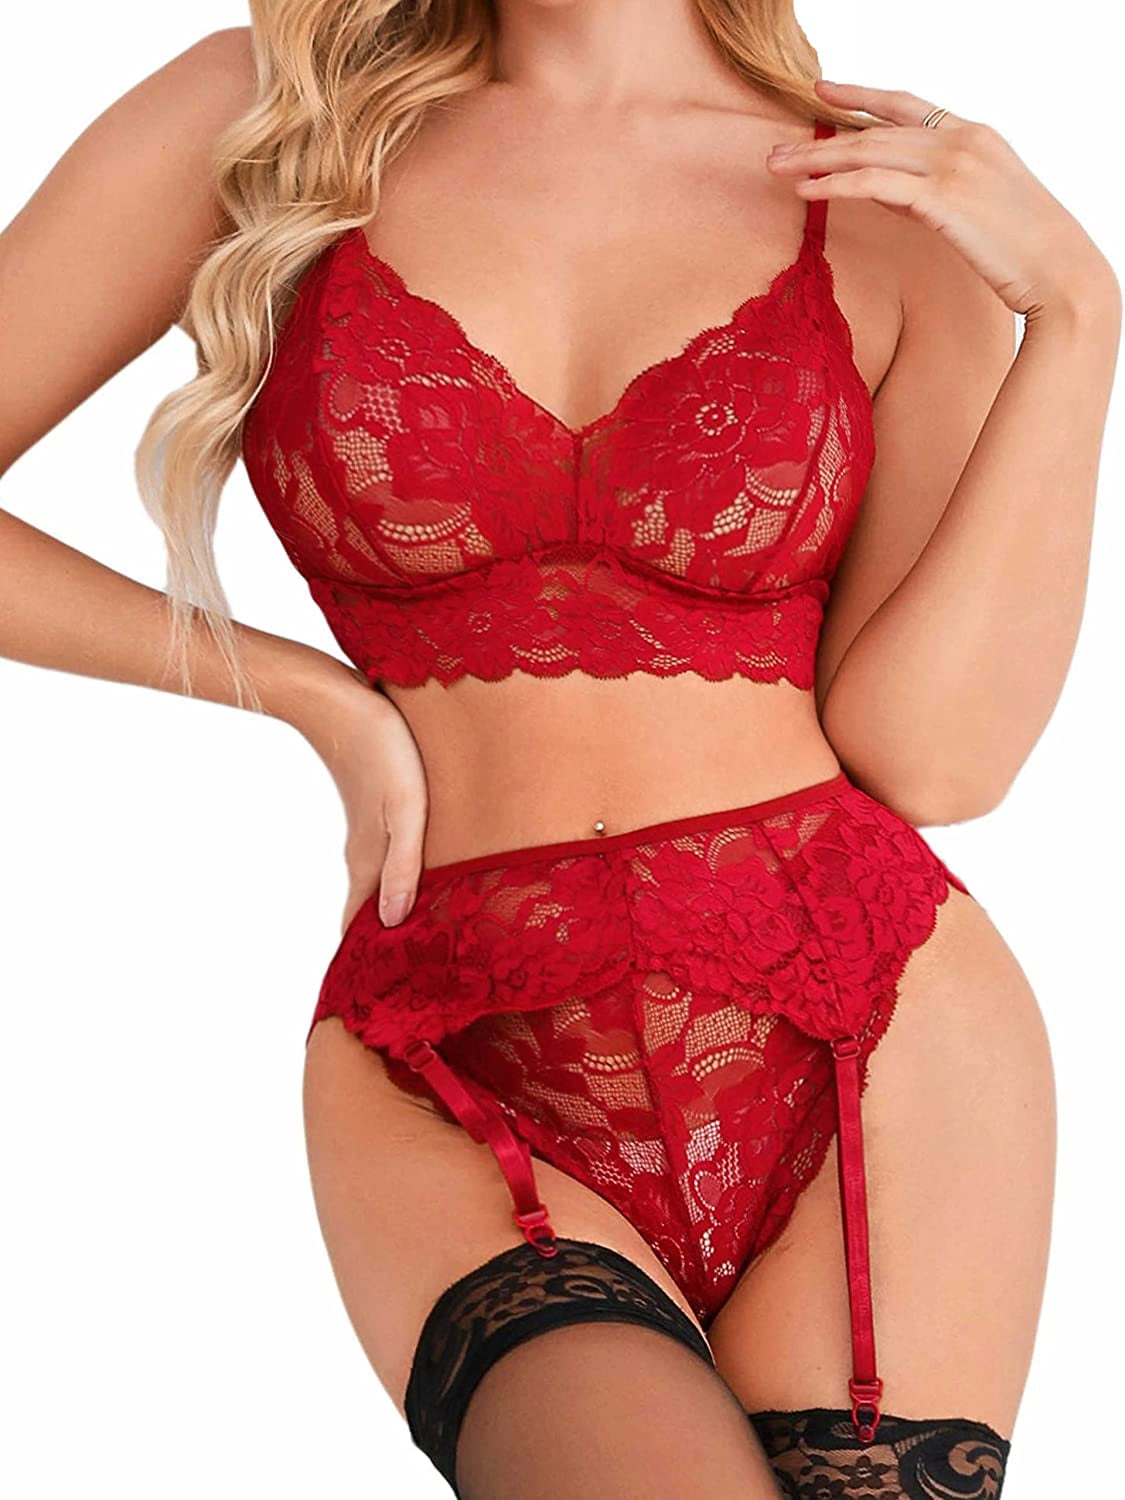 Sexy Lingerie Set for Women Naughty, 3 PC, Lace Bralette Bra and